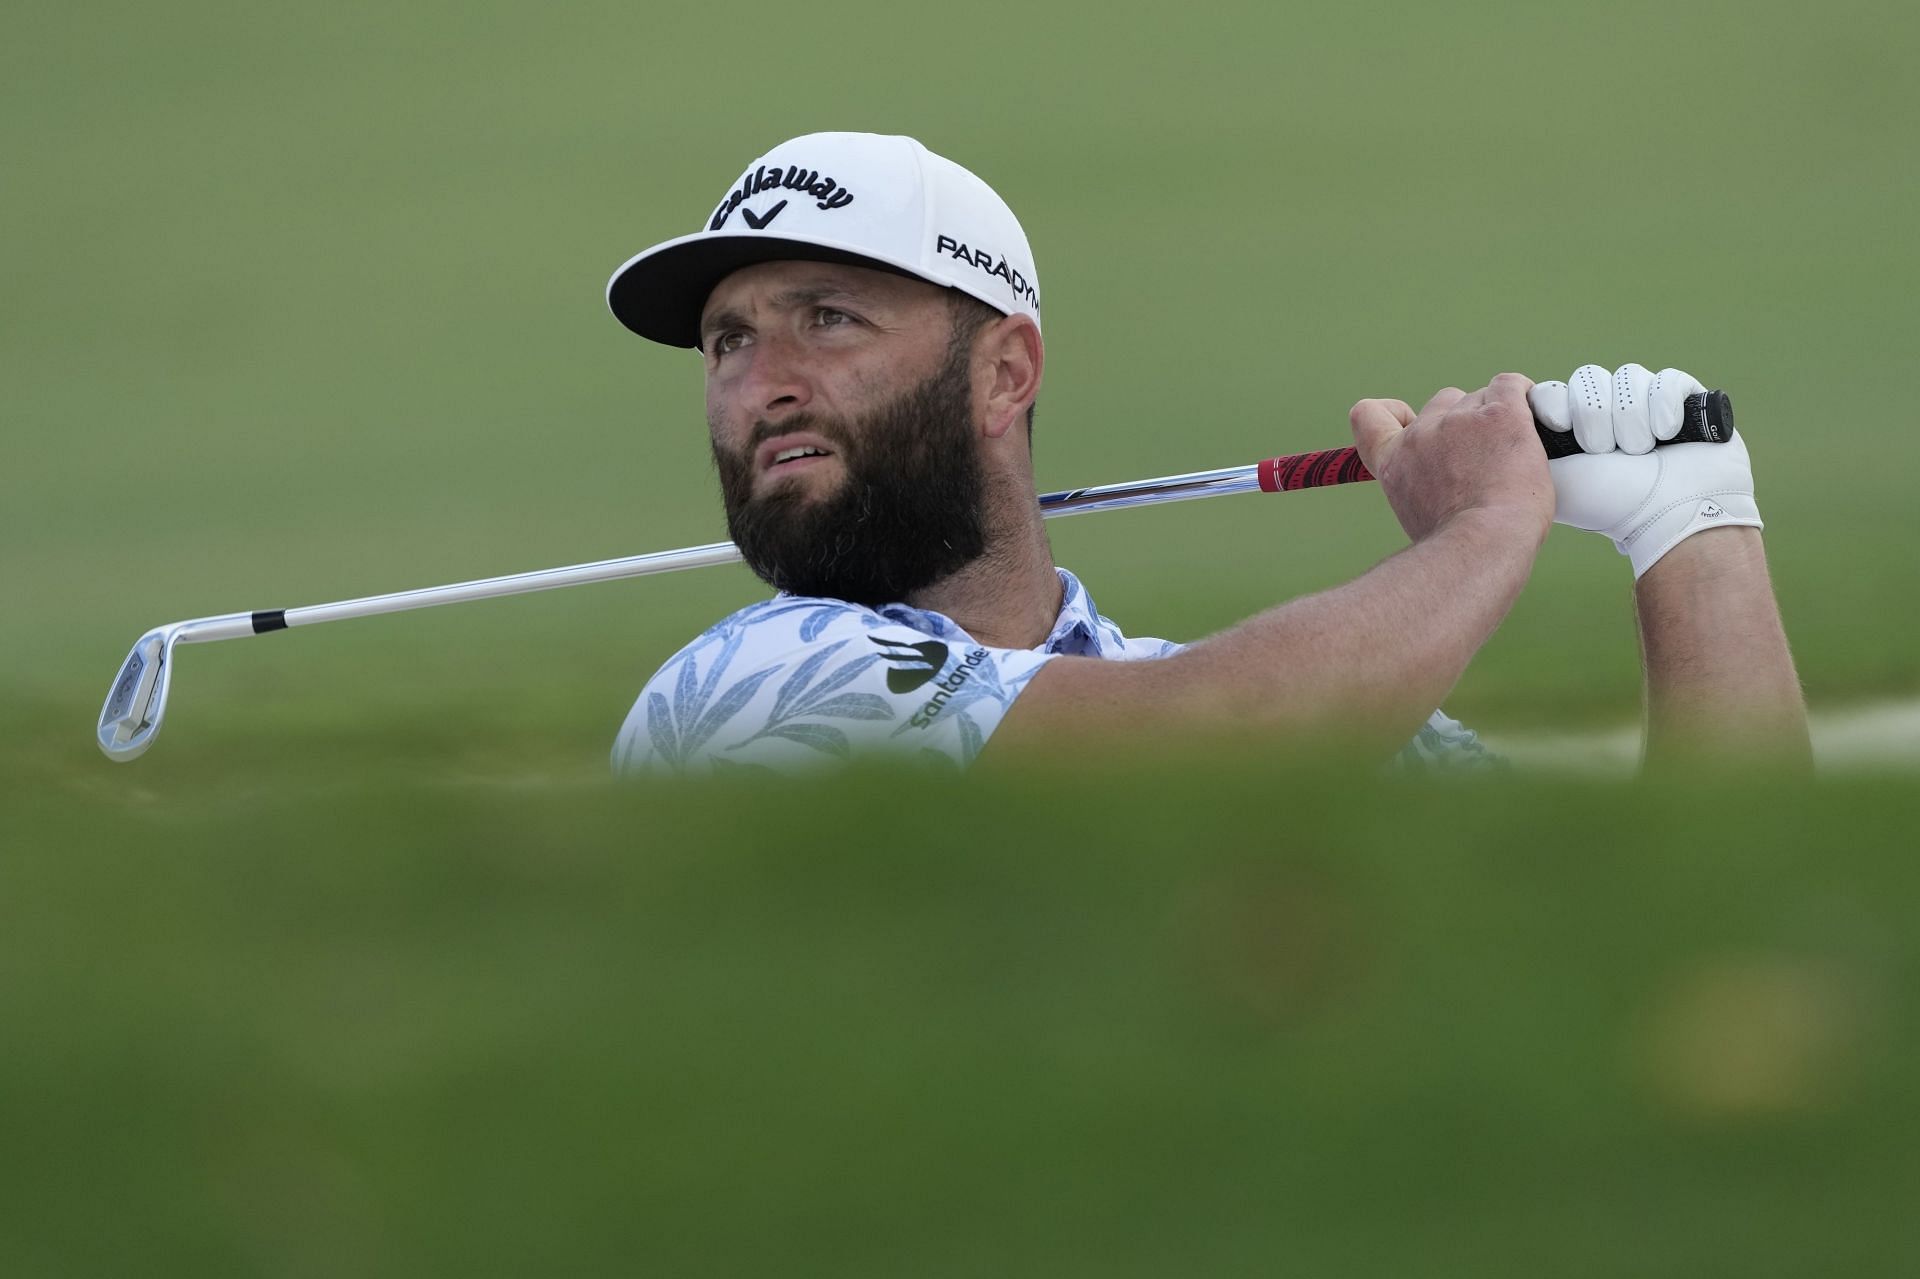 Jon Rahm declined to join TGL after initially agreeing